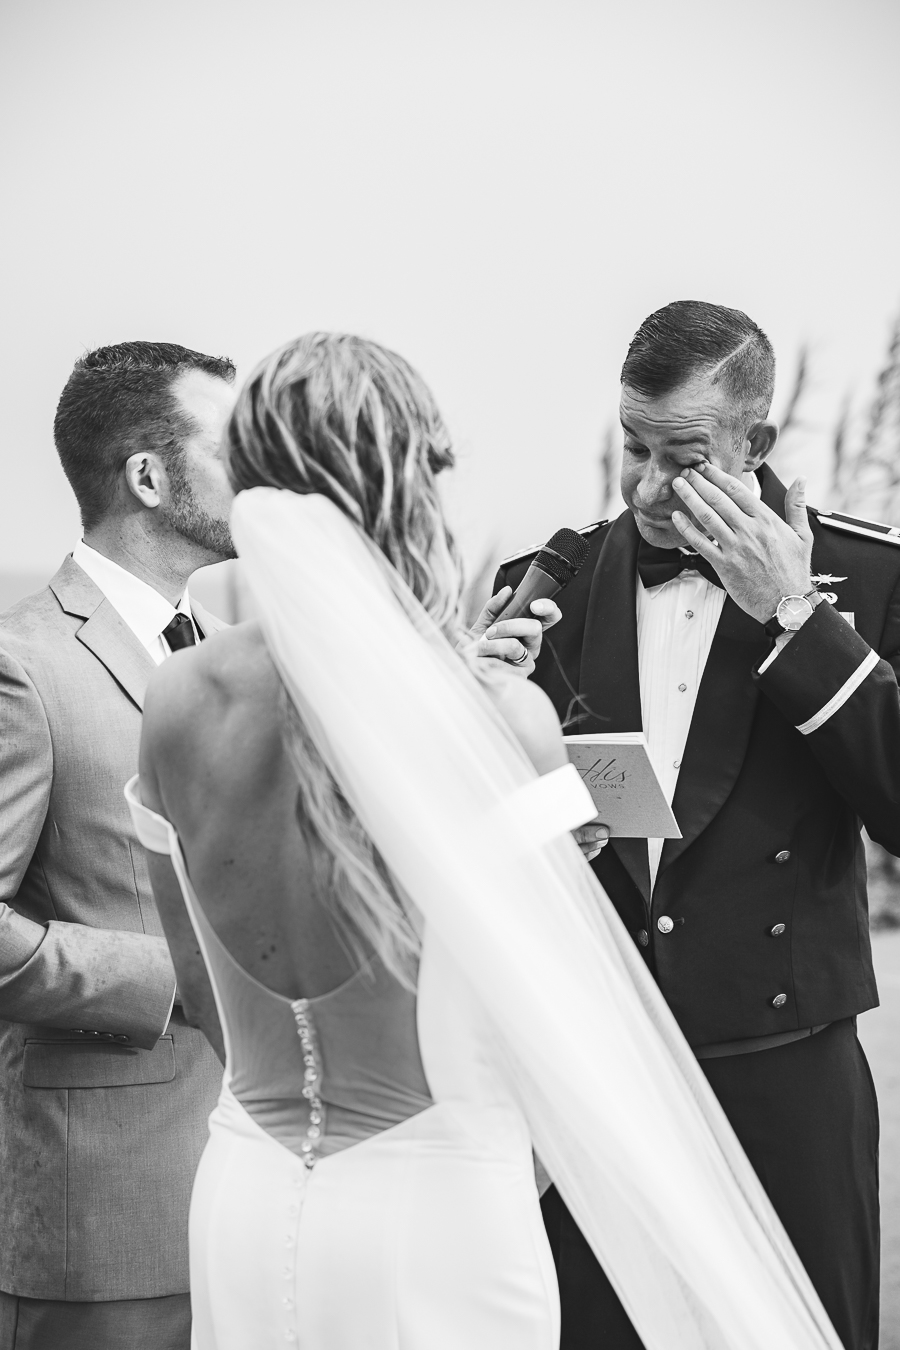 Wedding in Athens: emotional moment while groom reads his vows